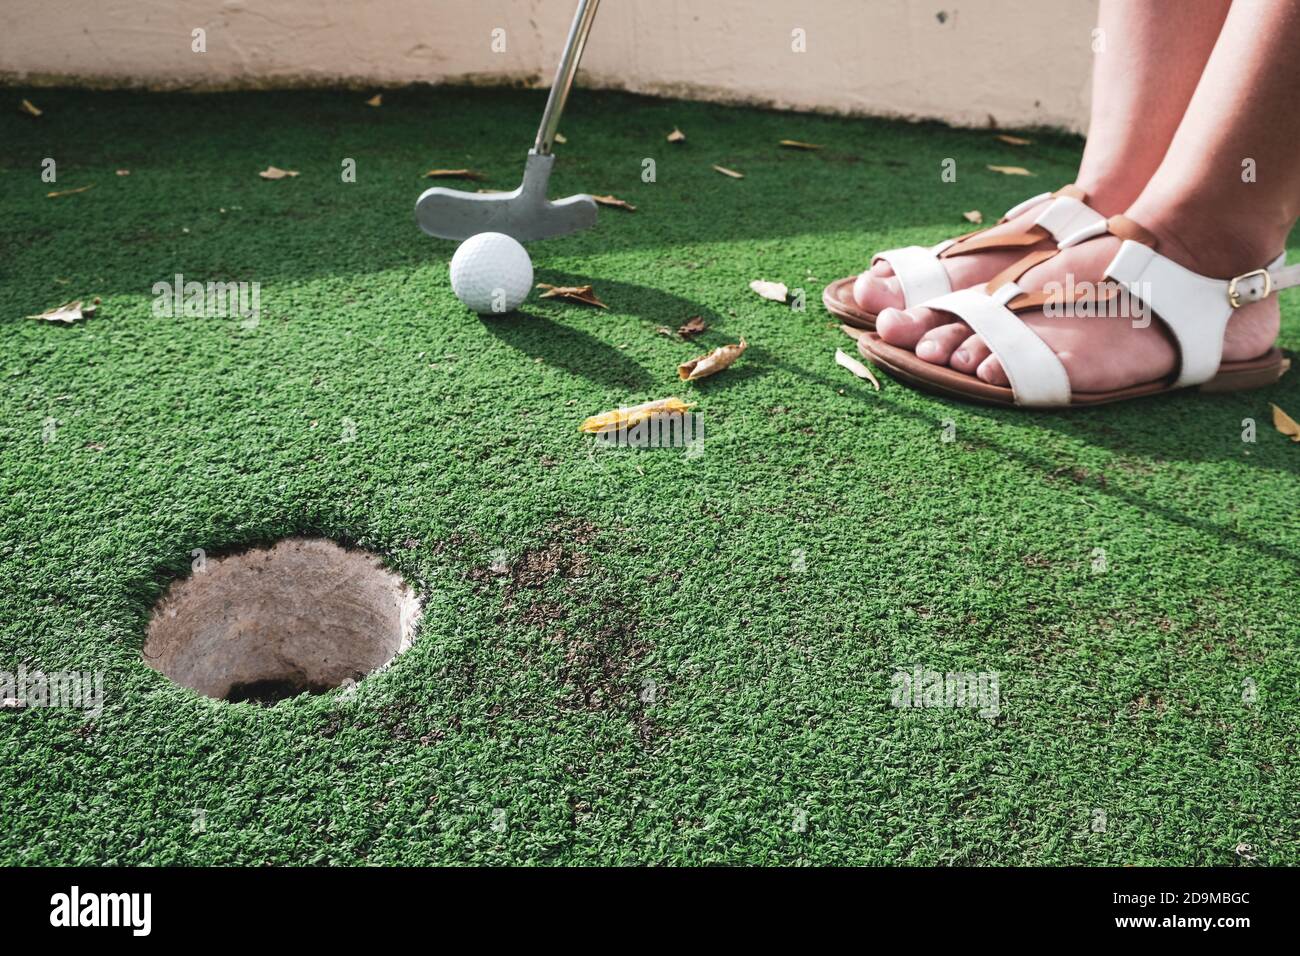 Girl or young woman playing mini golf on artificial green grass outdoors. Fun vacation entertainment for summertime. Putting club at ball, golf course Stock Photo